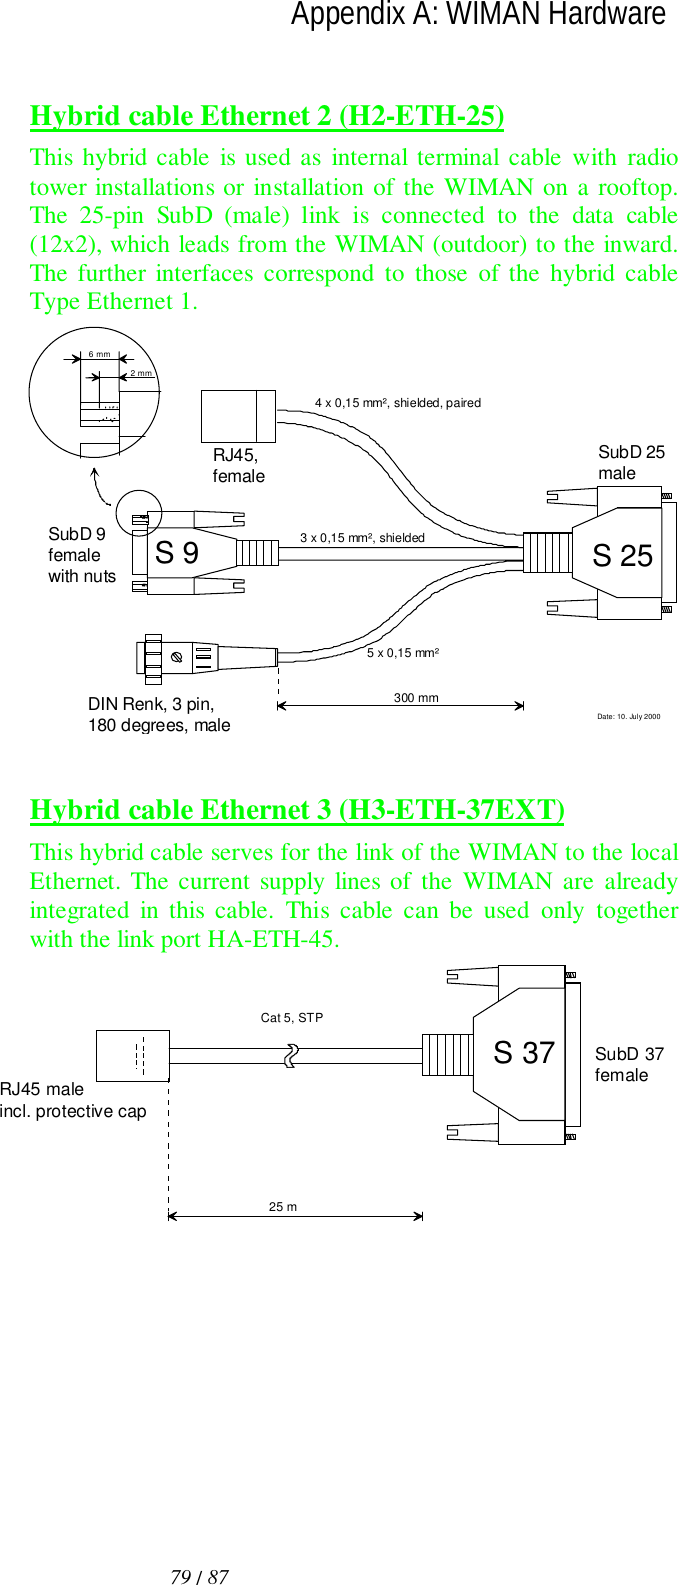 79 / 87lAppendix A: WIMAN HardwareHybrid cable Ethernet 2 (H2-ETH-25)This hybrid cable is used as internal terminal cable with radiotower installations or installation of the WIMAN on a rooftop.The 25-pin SubD (male) link is connected to the data cable(12x2), which leads from the WIMAN (outdoor) to the inward.The further interfaces correspond to those of the hybrid cableType Ethernet 1.SubD 25maleS 254 x 0,15 mm², shielded, paired5 x 0,15 mm²3 x 0,15 mm², shielded300 mmS 9SubD 9femalewith nutsRJ45,femaleDIN Renk, 3 pin,180 degrees, male2 mm6 mmDate: 10. July 2000Hybrid cable Ethernet 3 (H3-ETH-37EXT)This hybrid cable serves for the link of the WIMAN to the localEthernet. The current supply lines of the WIMAN are alreadyintegrated in this cable. This cable can be used only togetherwith the link port HA-ETH-45.S 37 SubD 37female25 mRJ45 maleincl. protective capCat 5, STP 